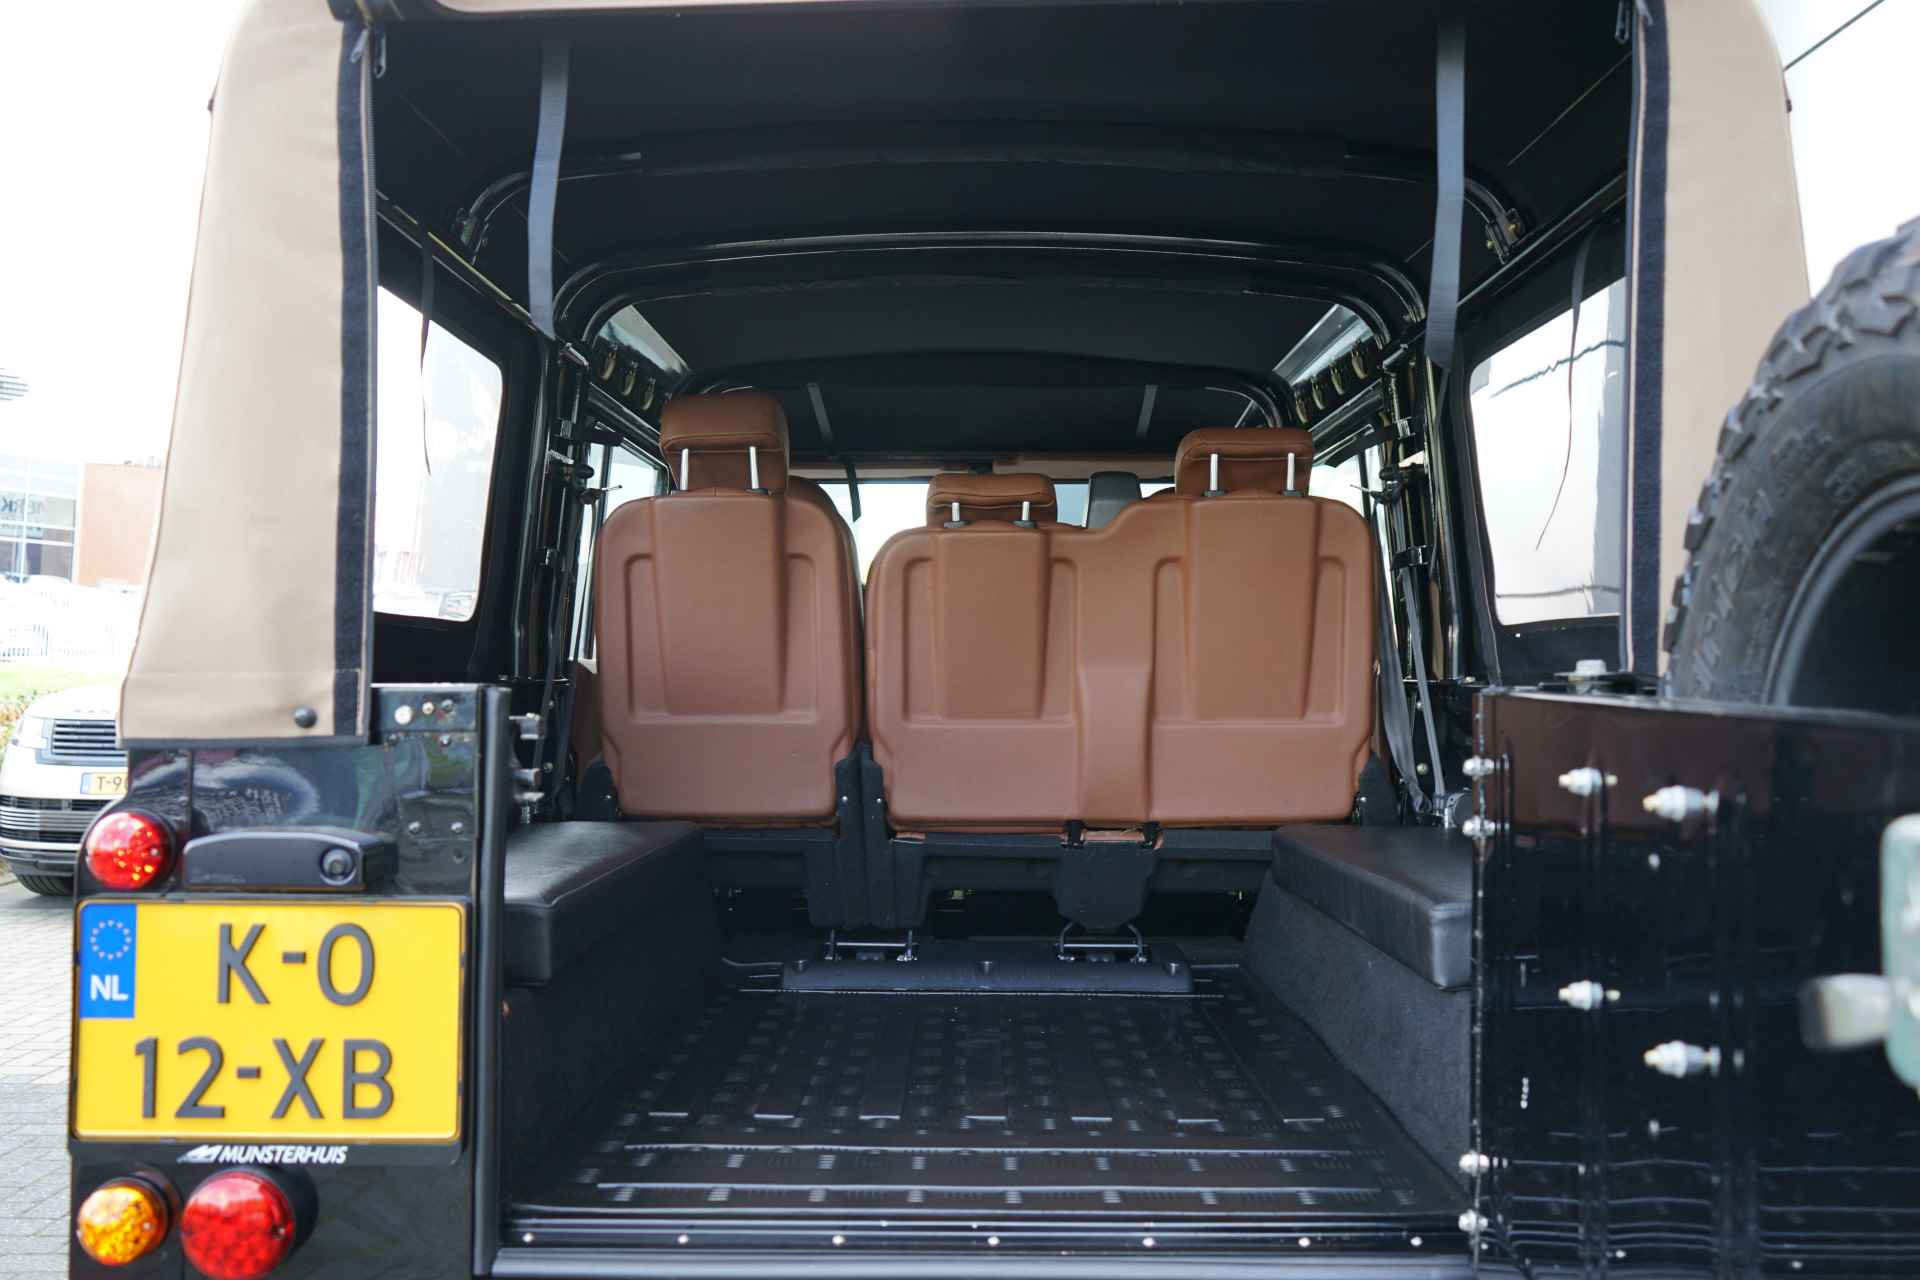 Land Rover Defender 2.4 TD 110 SW Convertible Brand New - River House Rebuild, Butterscotch Leather, BF Goodridge Tyres - 21/26